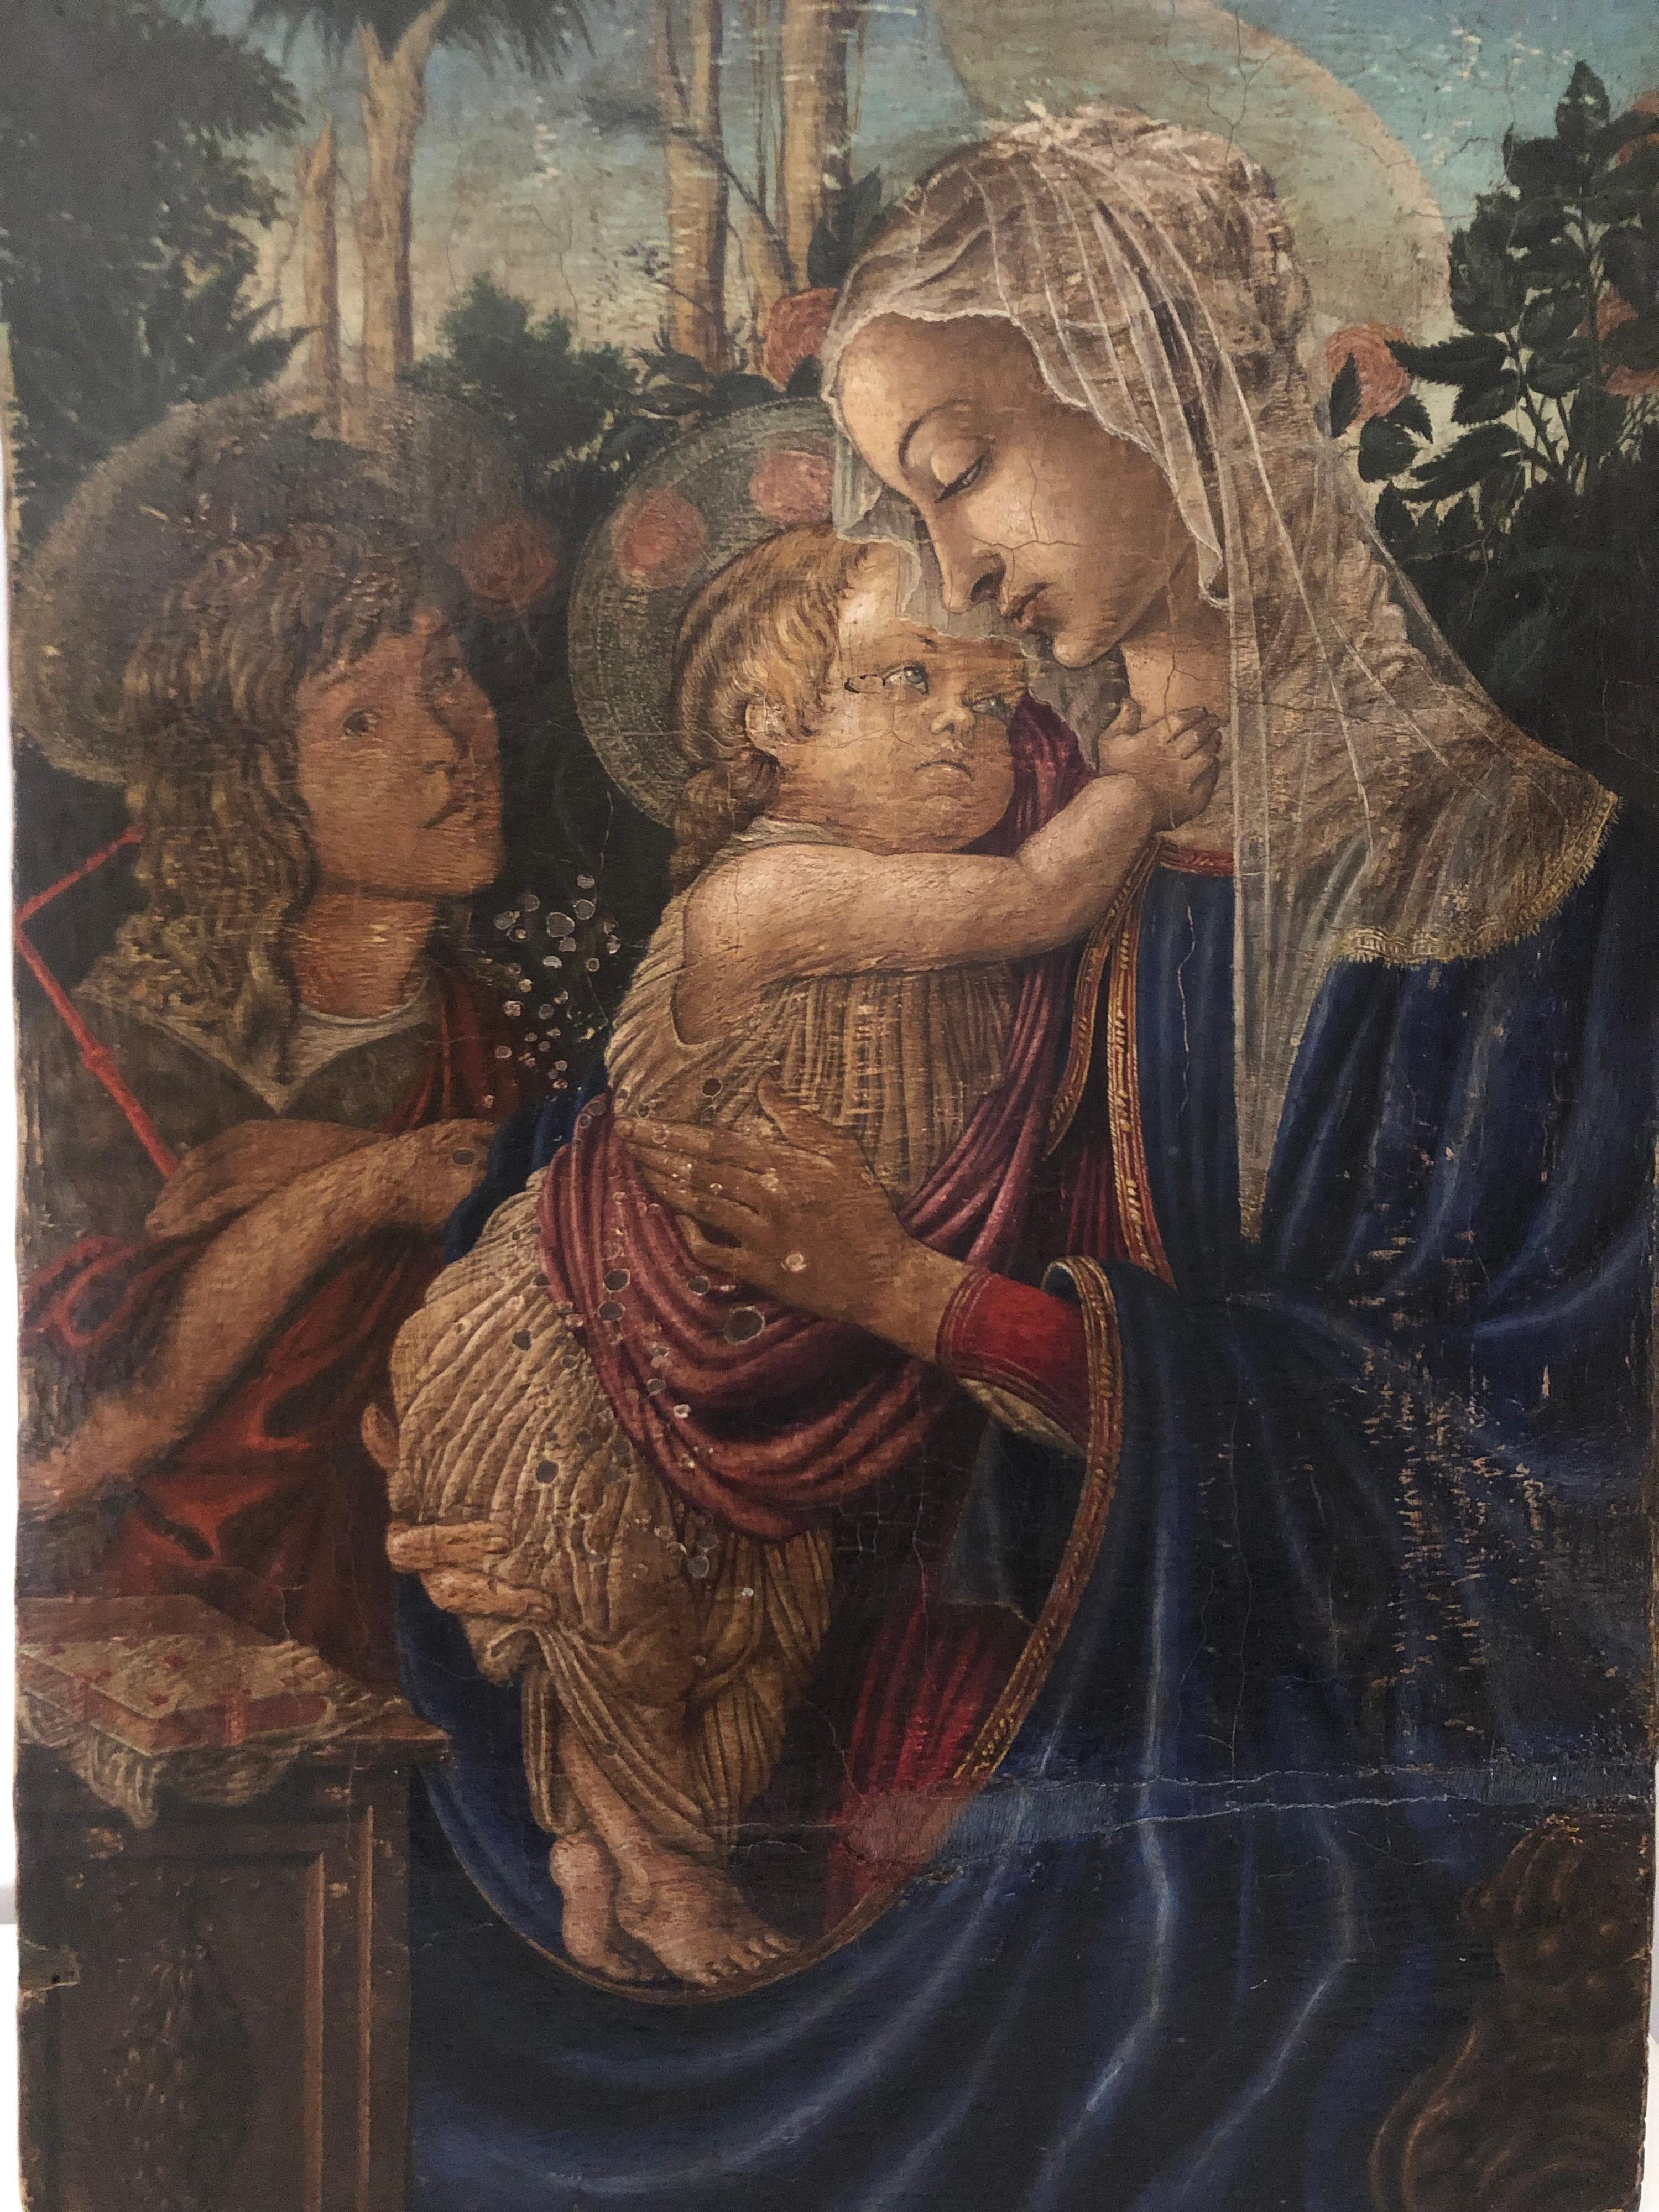 Oil on board depicting the Madonna with child and Saint John the Baptist in the early 20th century by the painter Umberto Giunti (1886-1970).
It is complemented by an architectonic framework which offer a view into a rose garden. The rose garden is